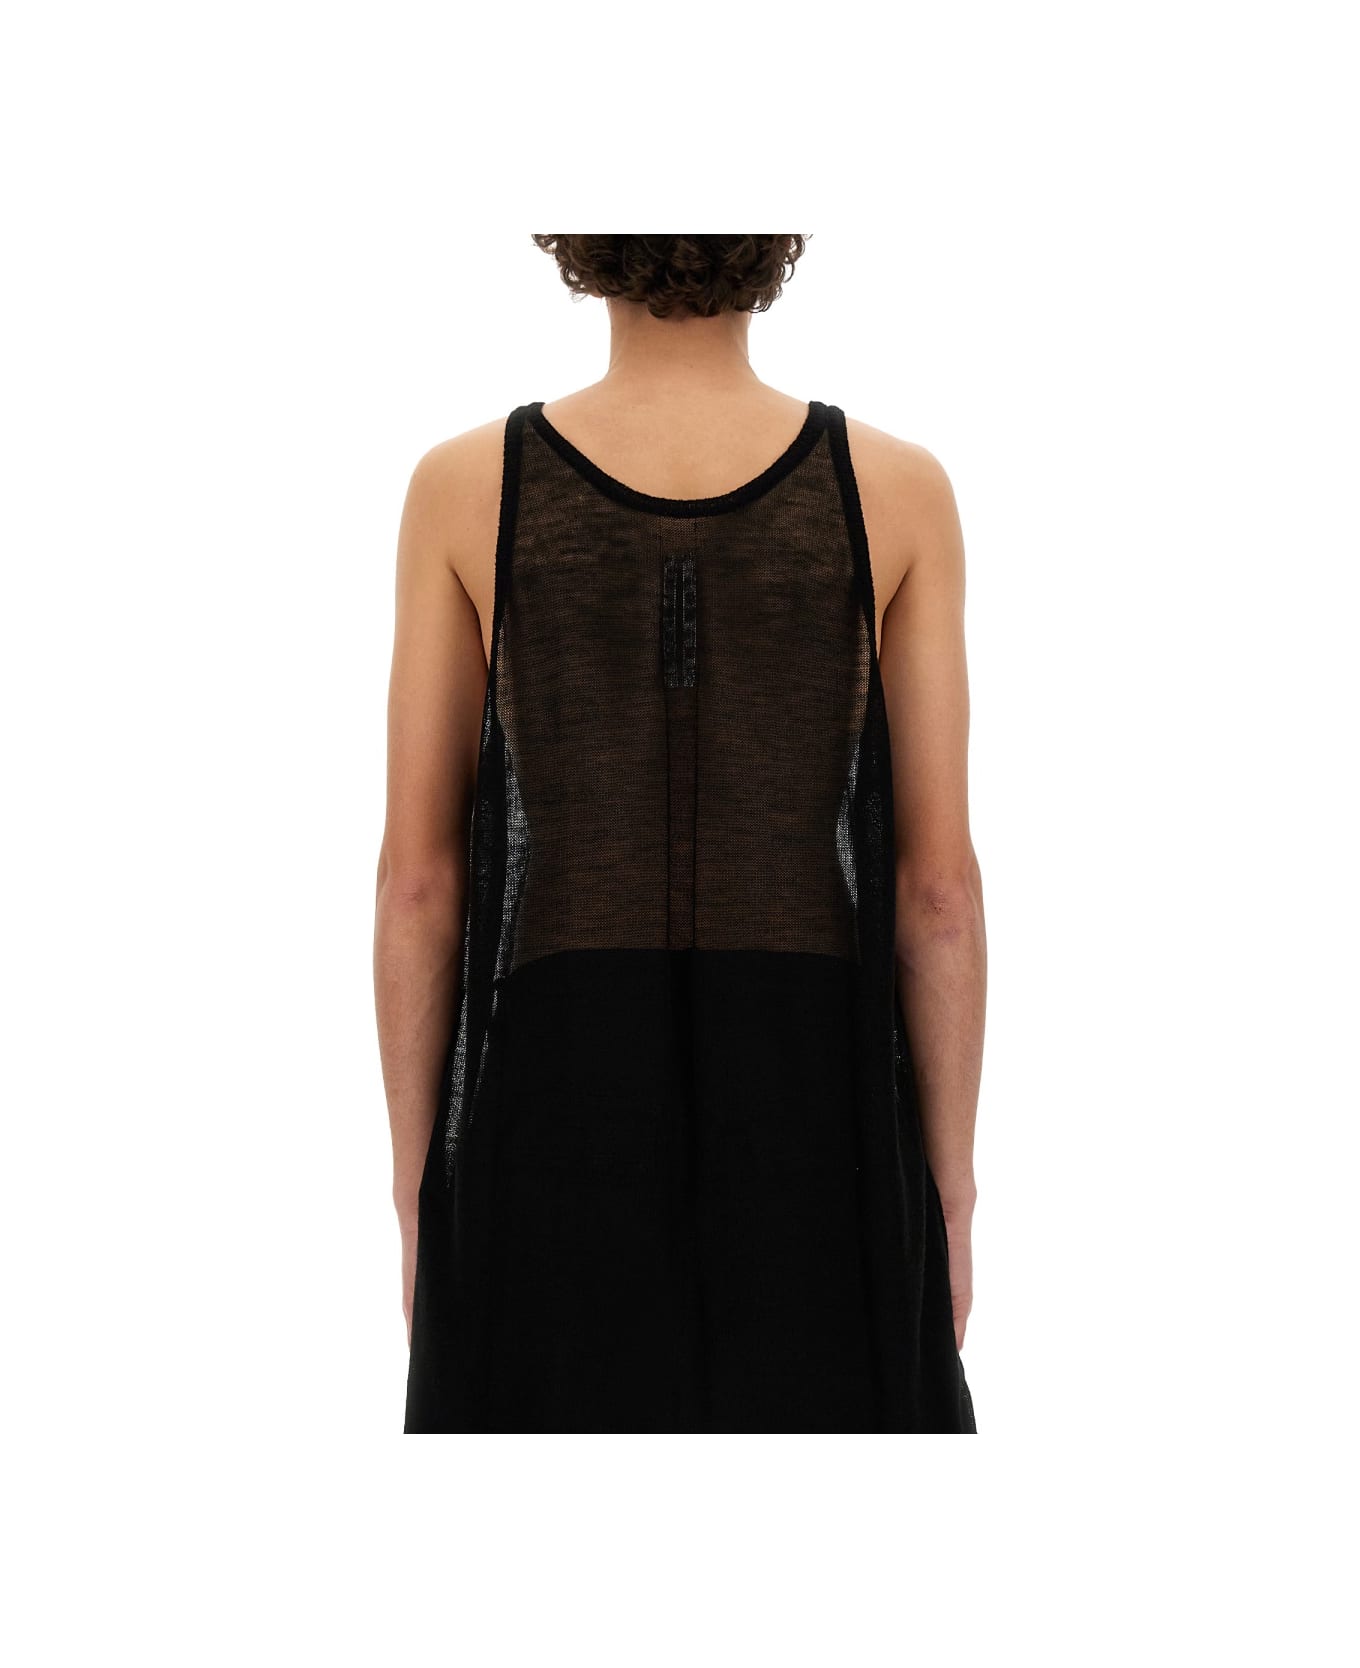 Rick Owens Knitted Tank Top - BLACK タンクトップ